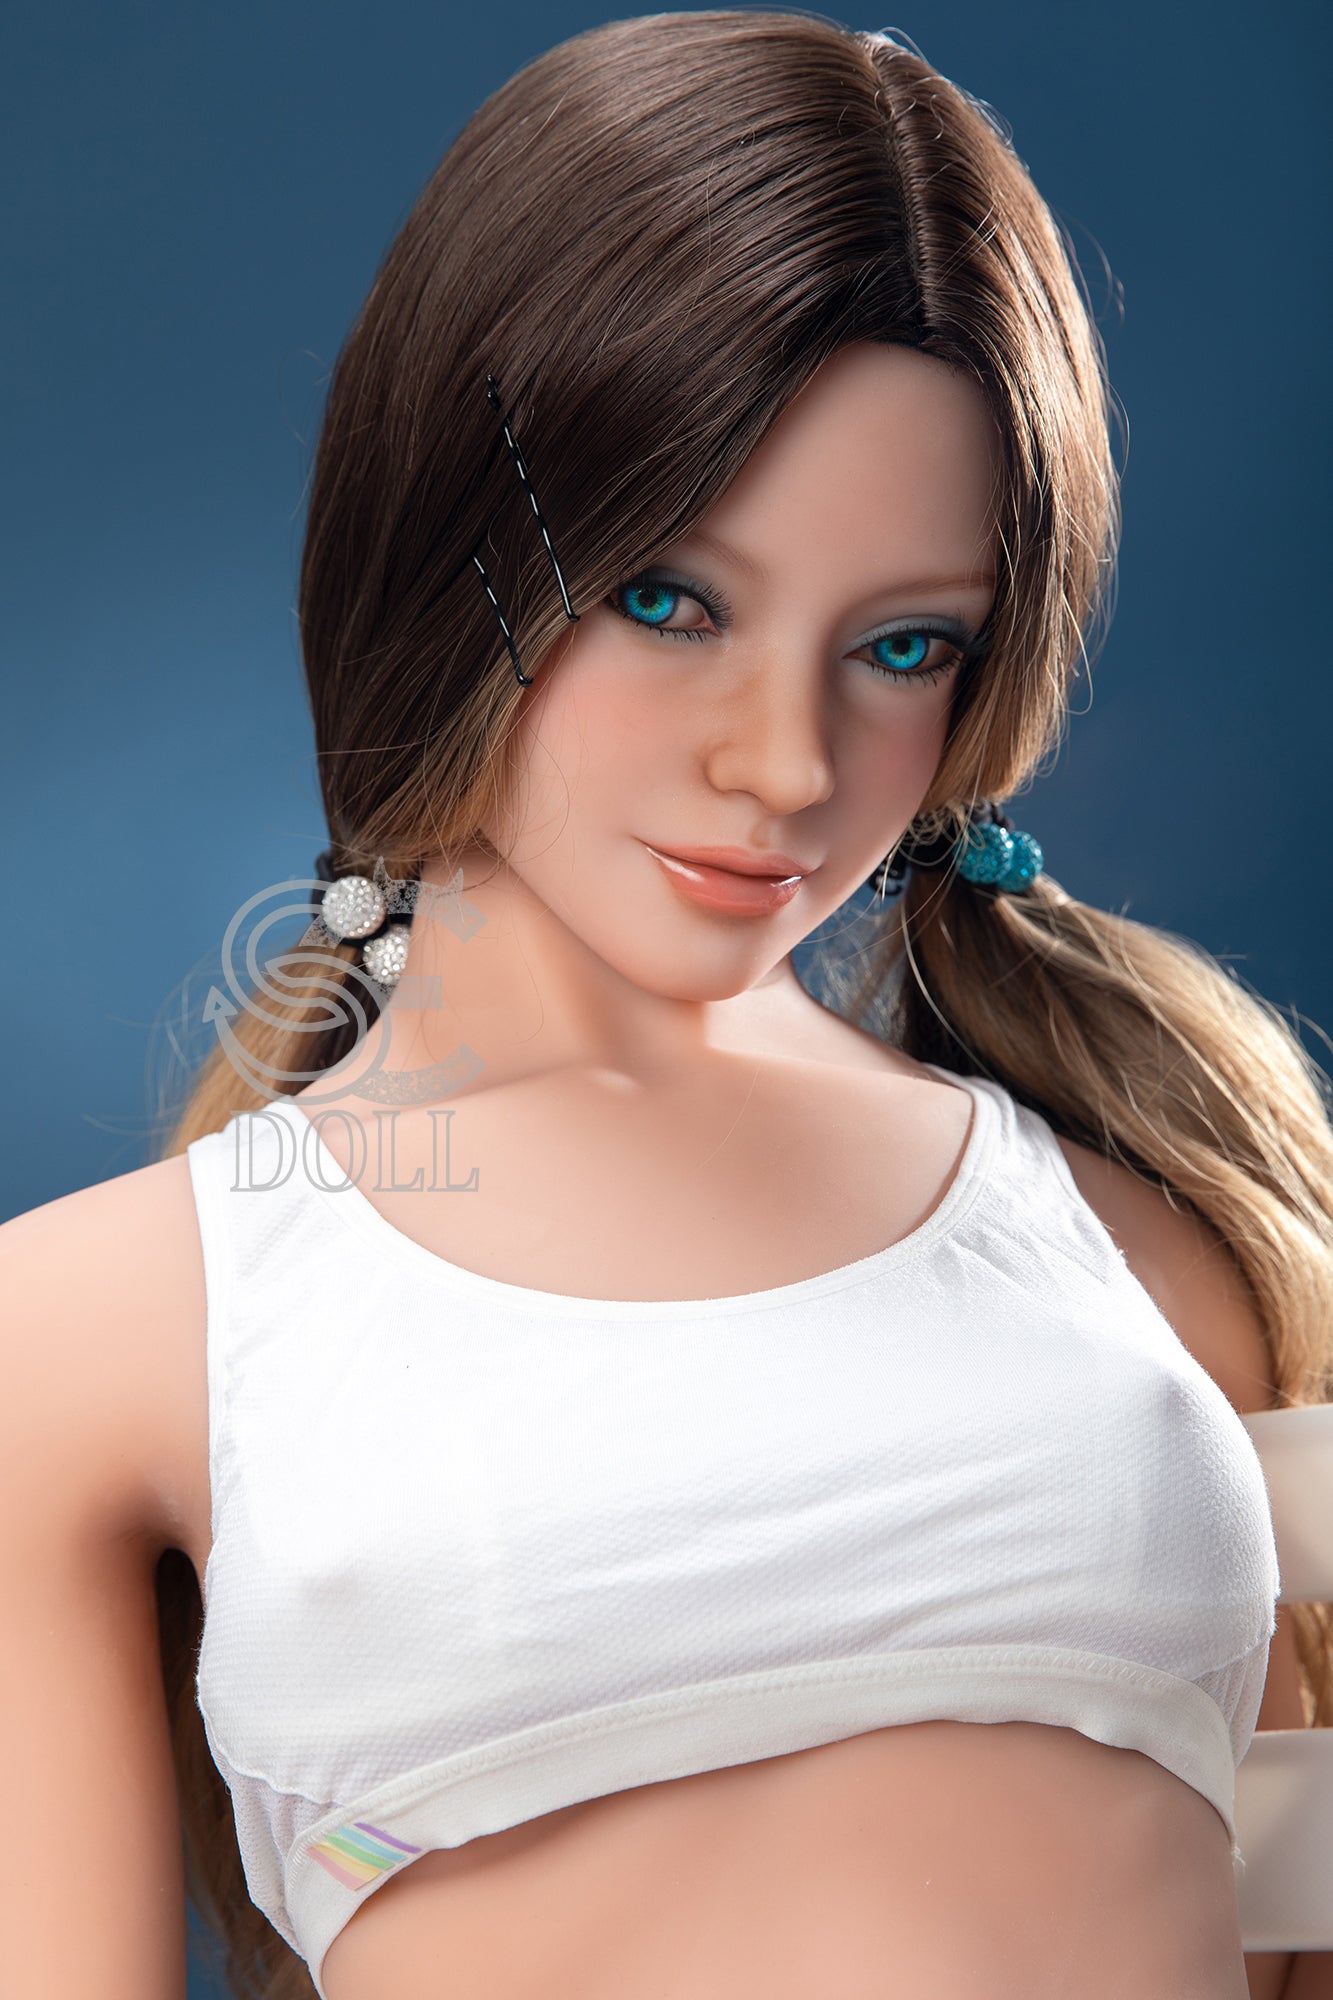 SEDOLL 166 cm C TPE - Connie | Buy Sex Dolls at DOLLS ACTUALLY